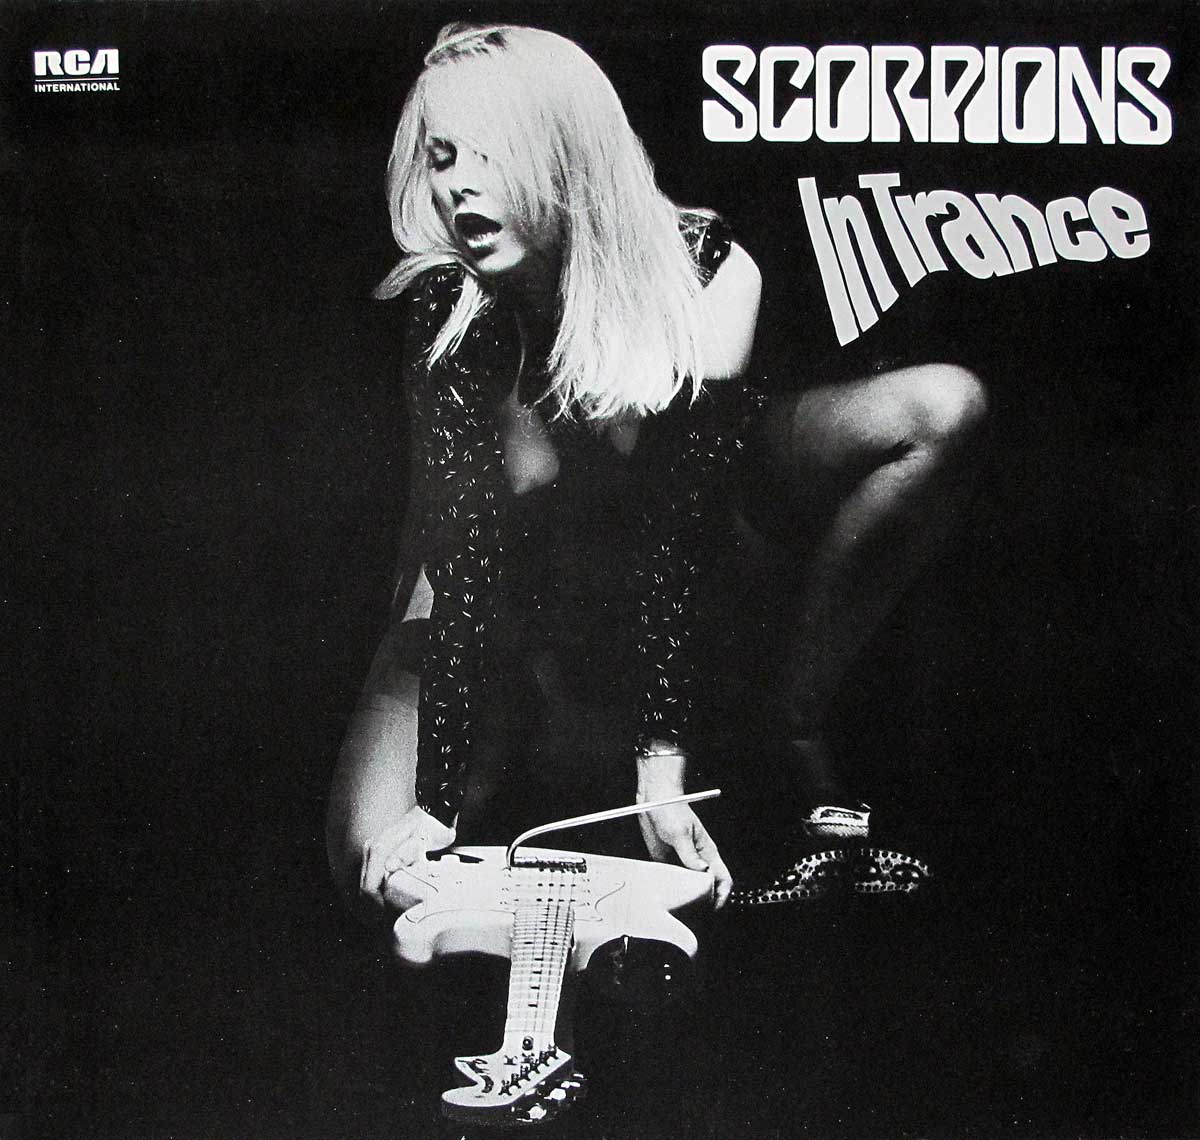 1975. Scorpions- In Trance Scorpions-in-trance-large